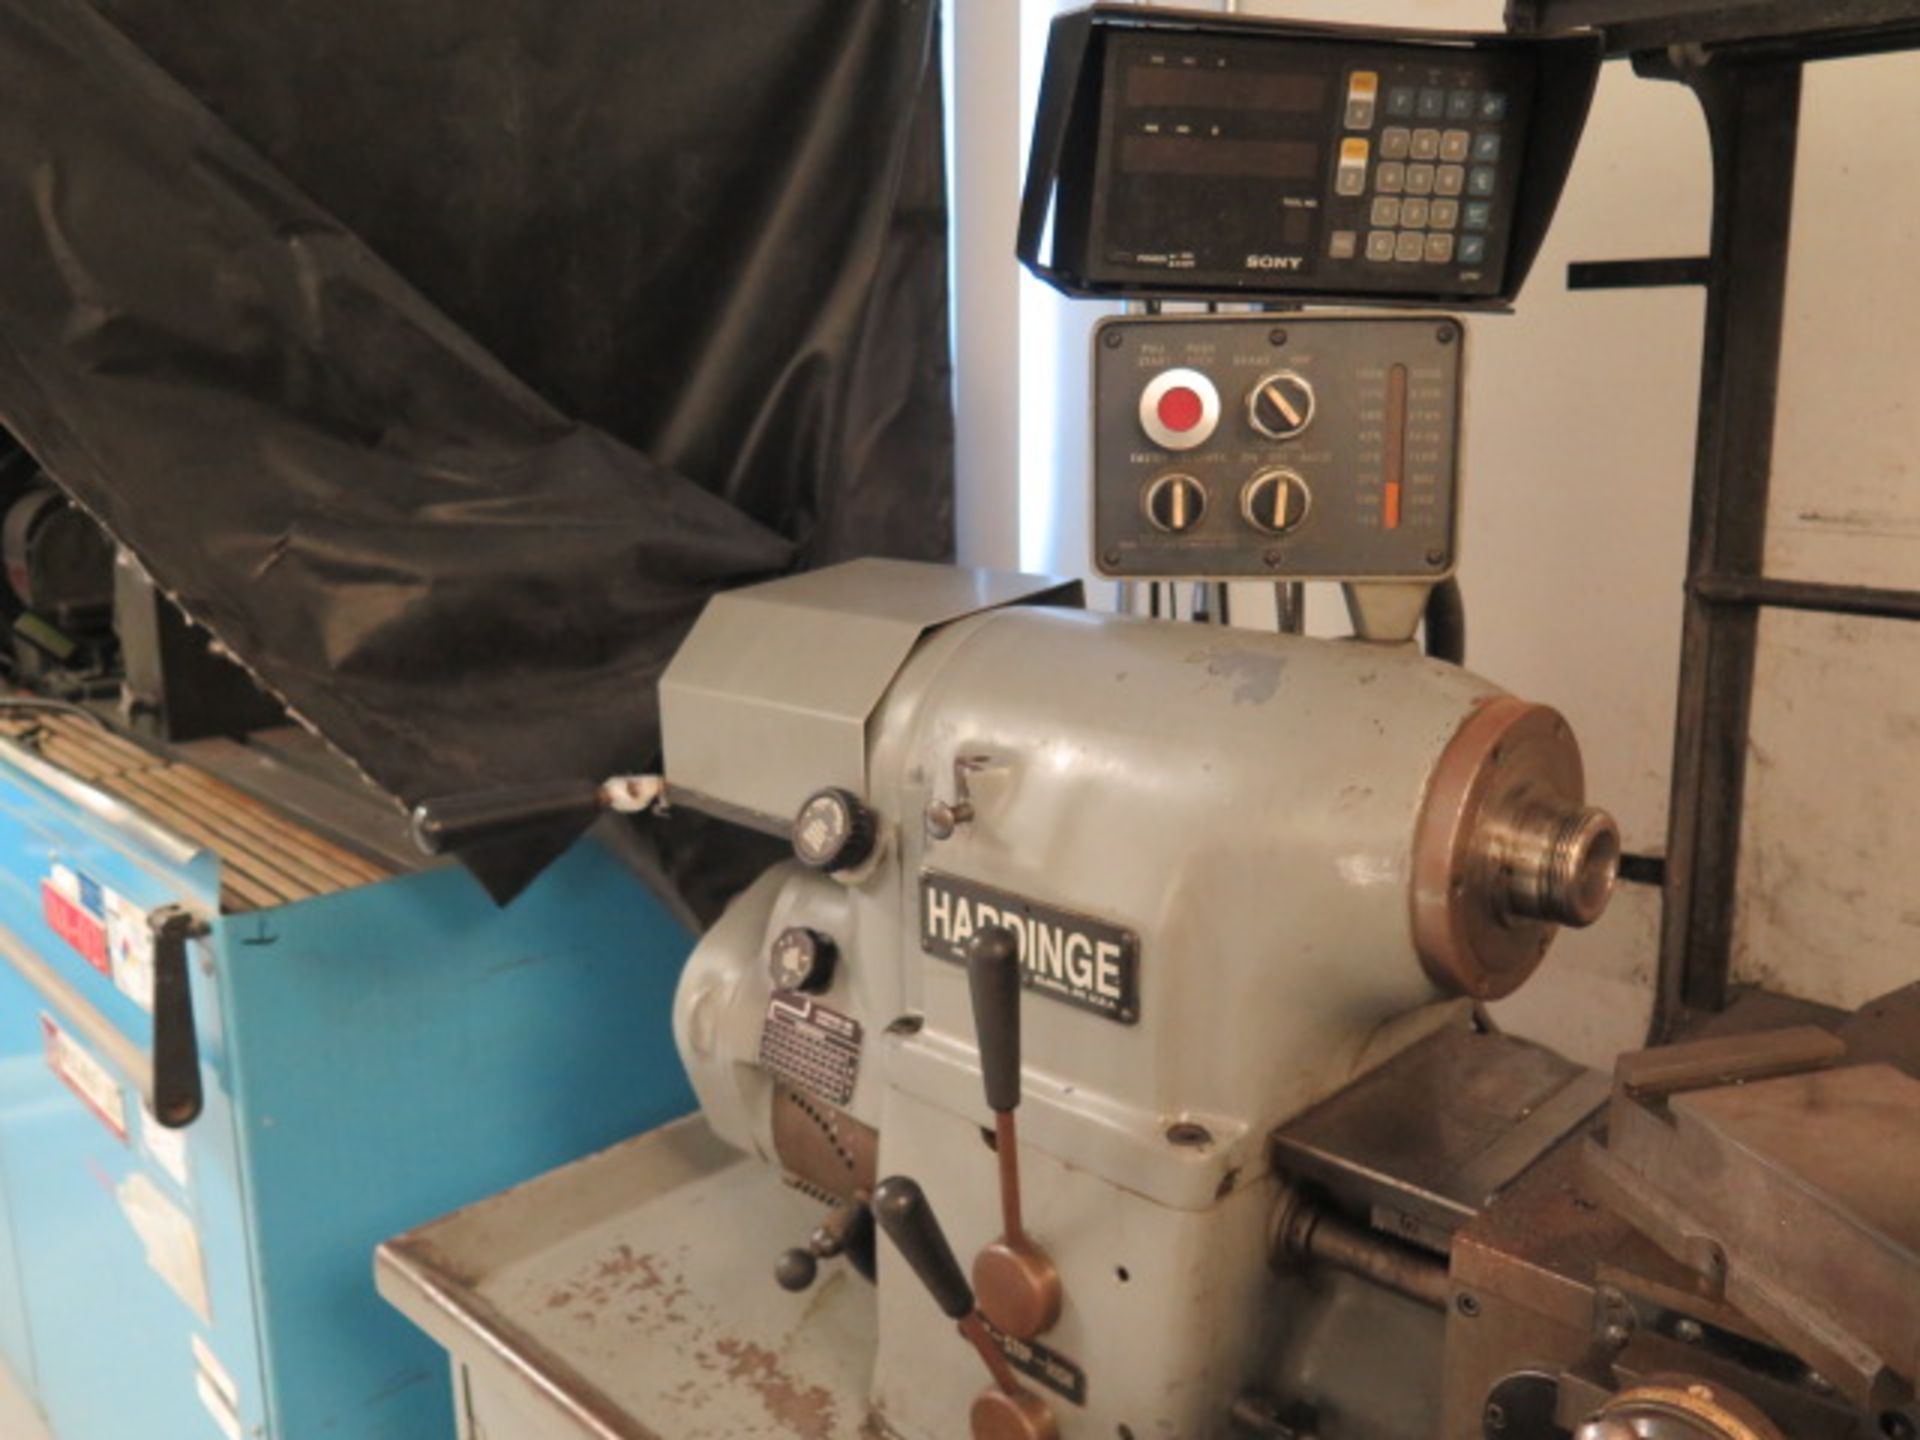 Hardinge HLV-H Wide Bed Tool Room Lathe s/n HLV-H-7583-T w/ Sony LH52 Programmable DRO, SOLD AS IS - Image 5 of 15